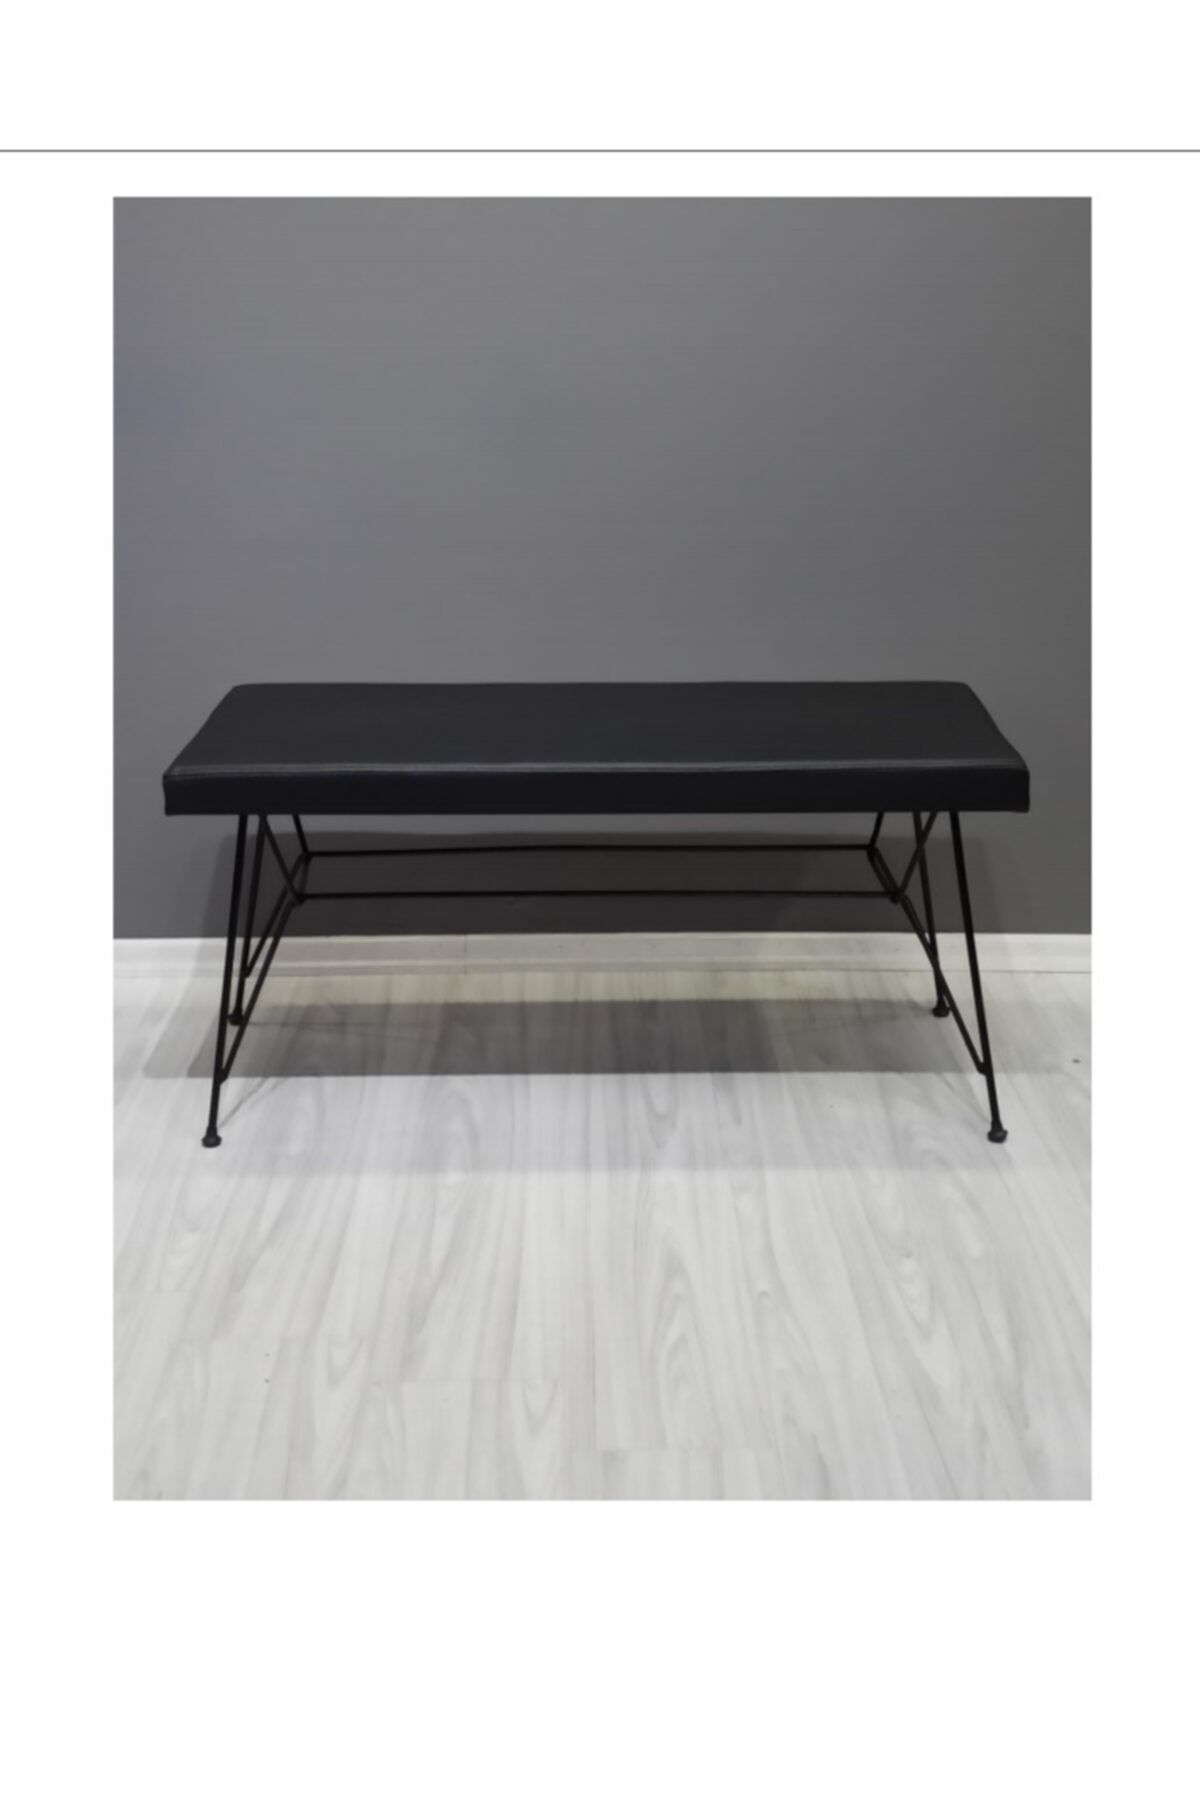 ALTAN HOME Bench Sehpa